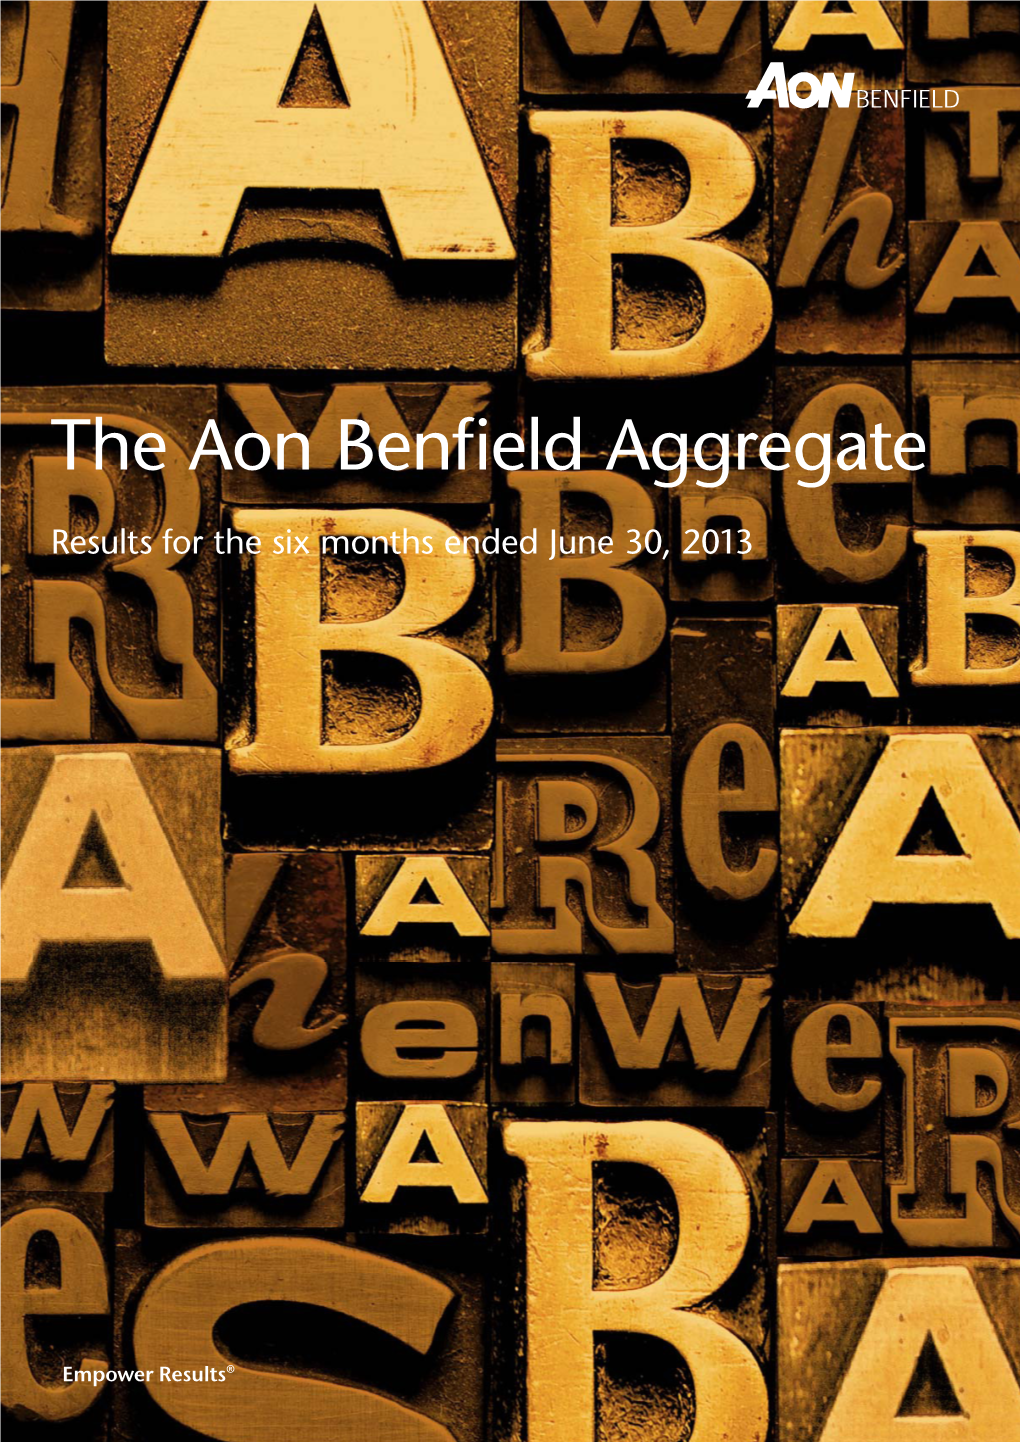 The Aon Benfield Aggregate